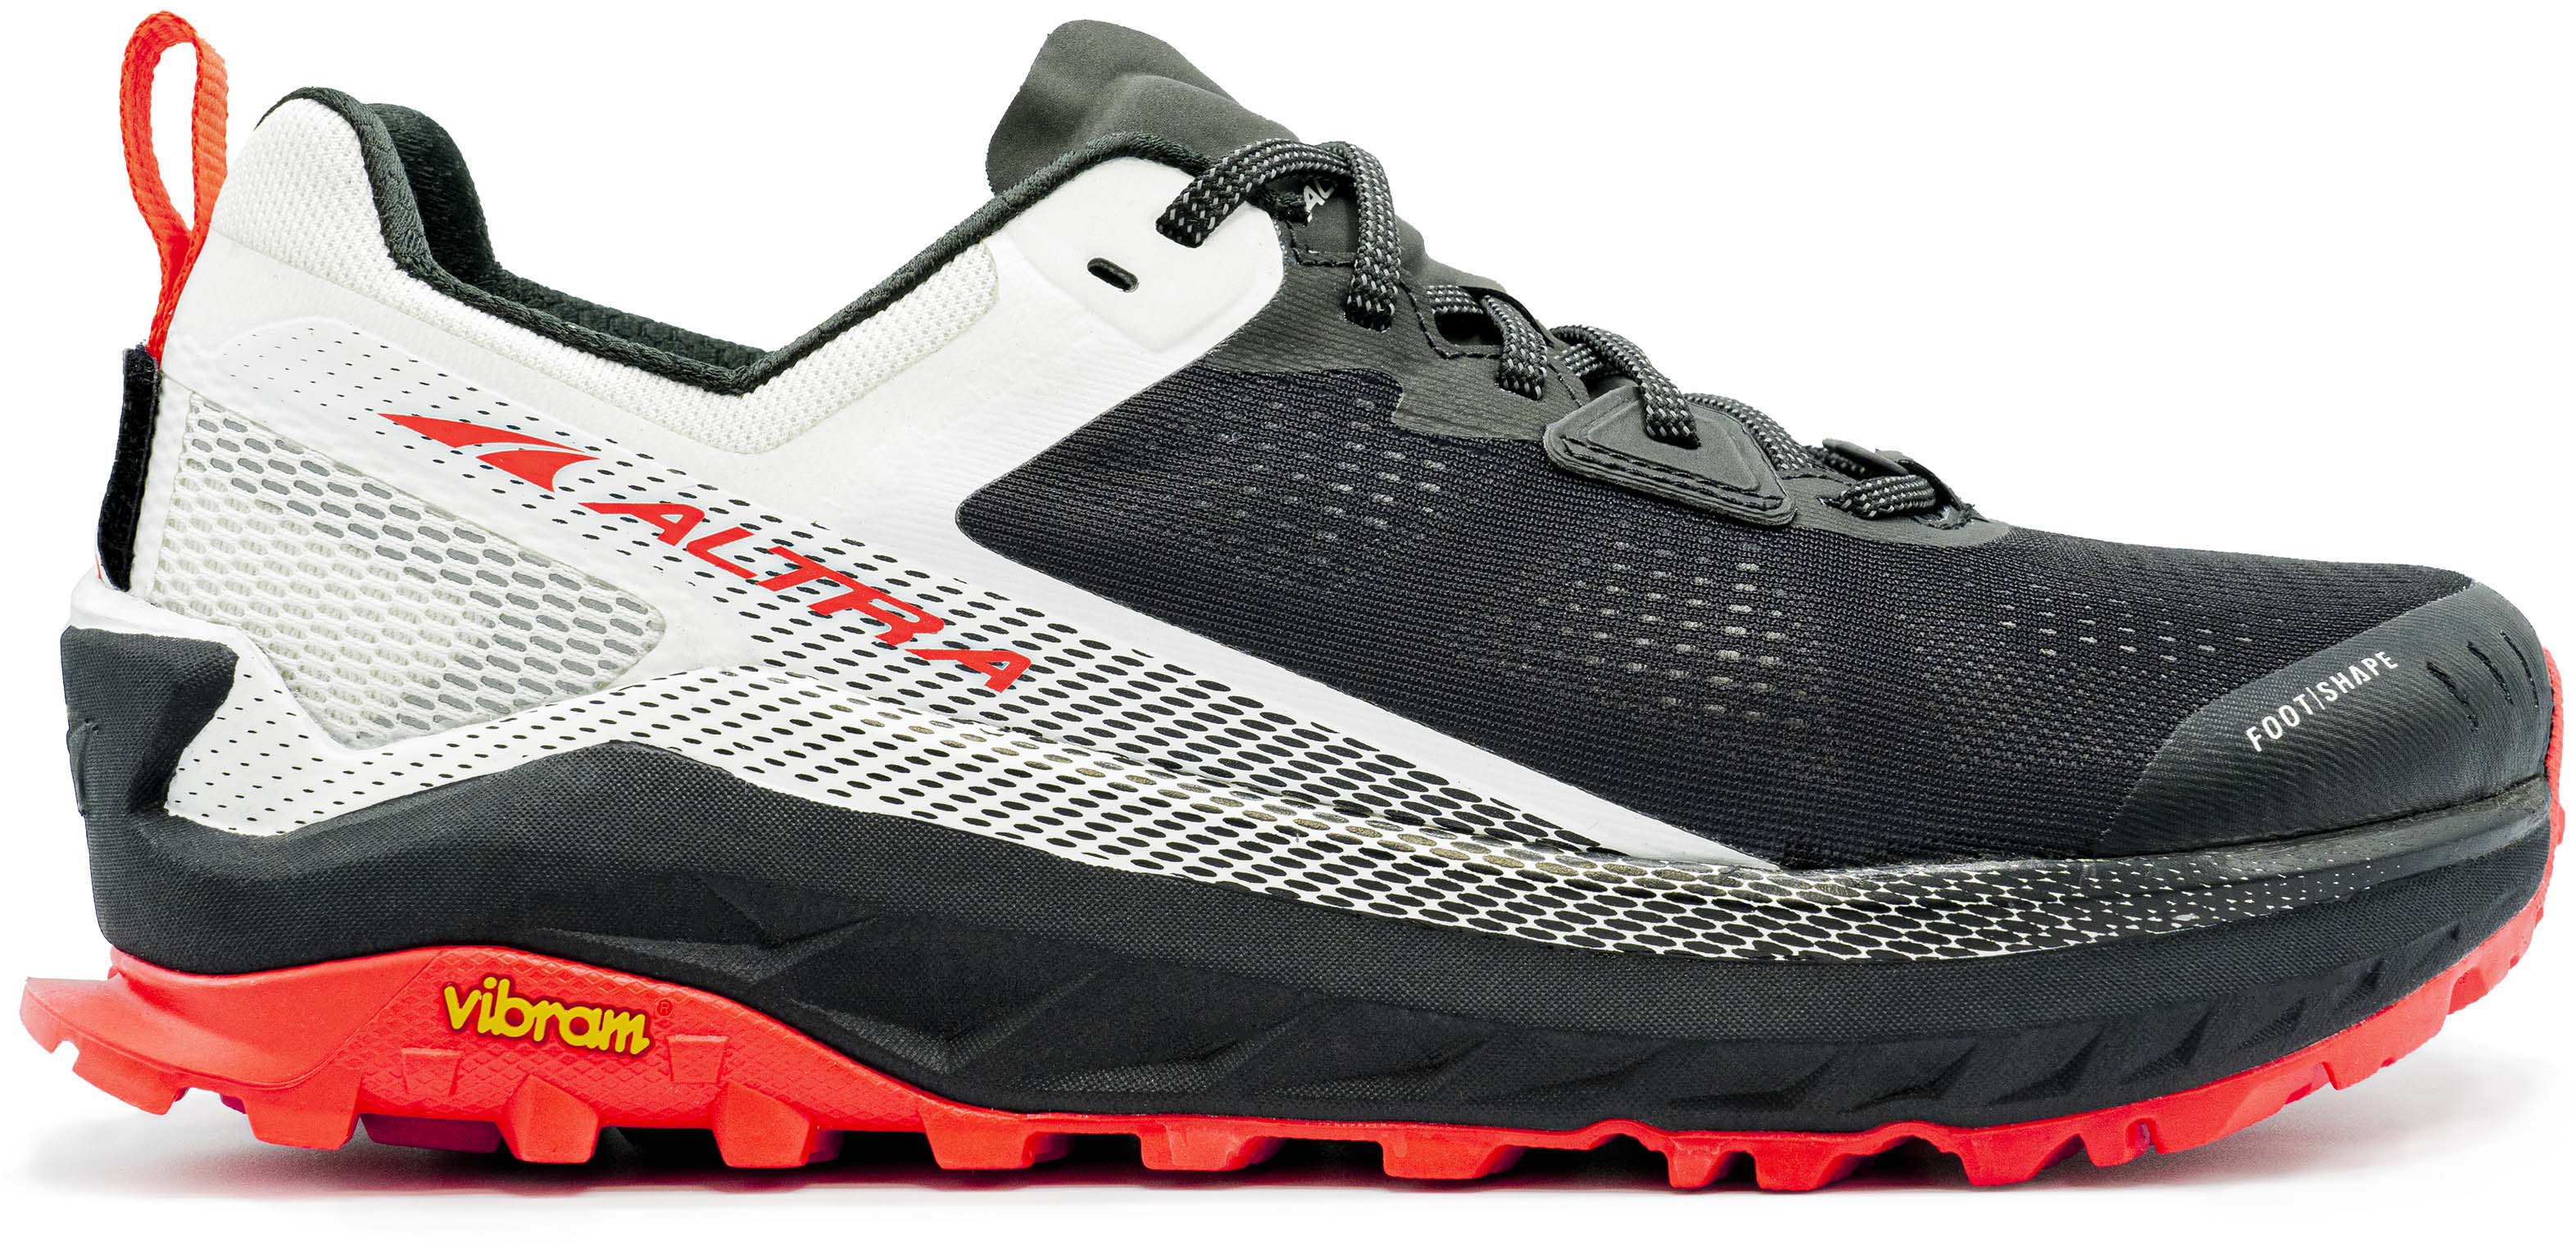 Altra Olympus 4 Shoes - Men's AL0A4VQM010-8-MED with Free S&H 